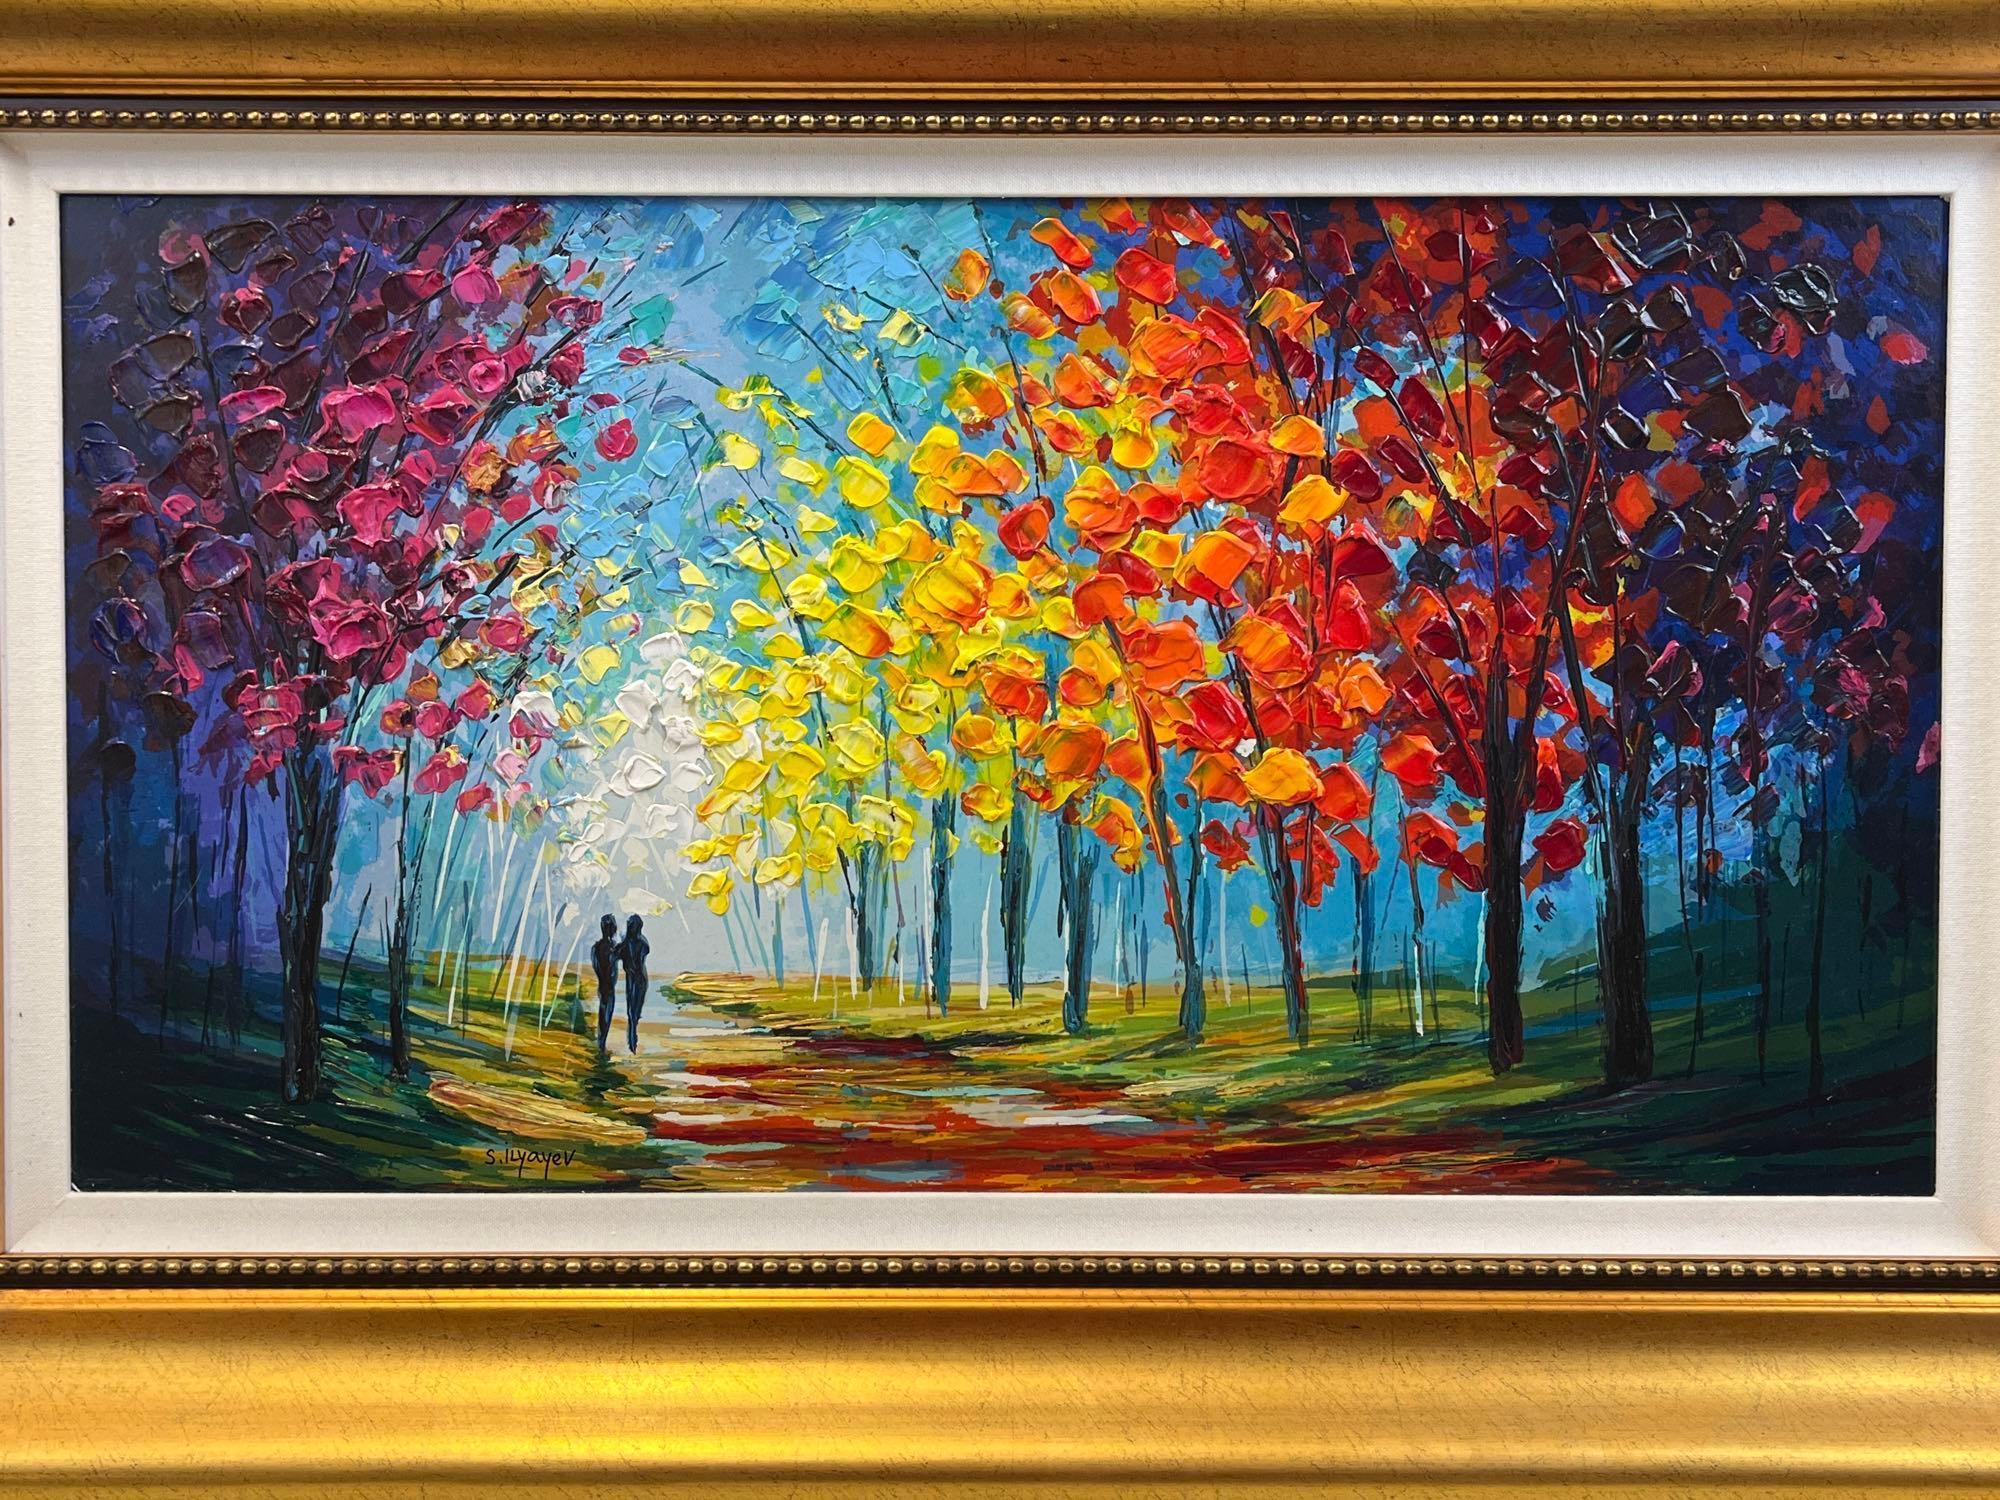 Vivid Serigraph on Wood "What a Nice Day", by Slava Ilyayev, in Gold Frame